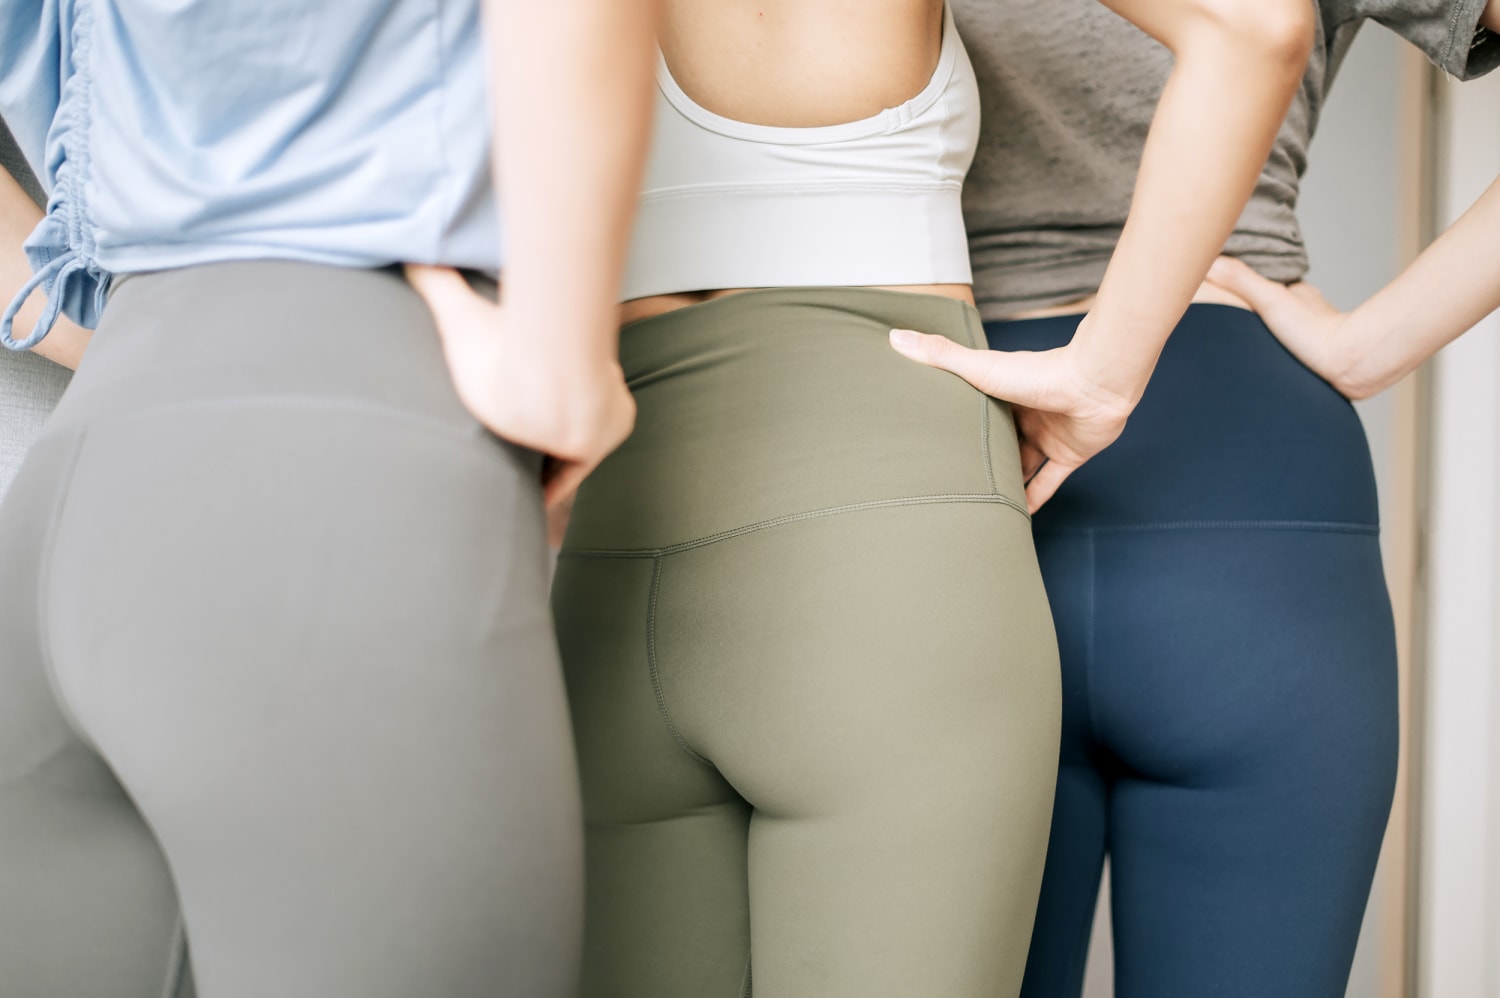 What is a Hip Dip and What to Wear When You Have Hip Dips — Inside